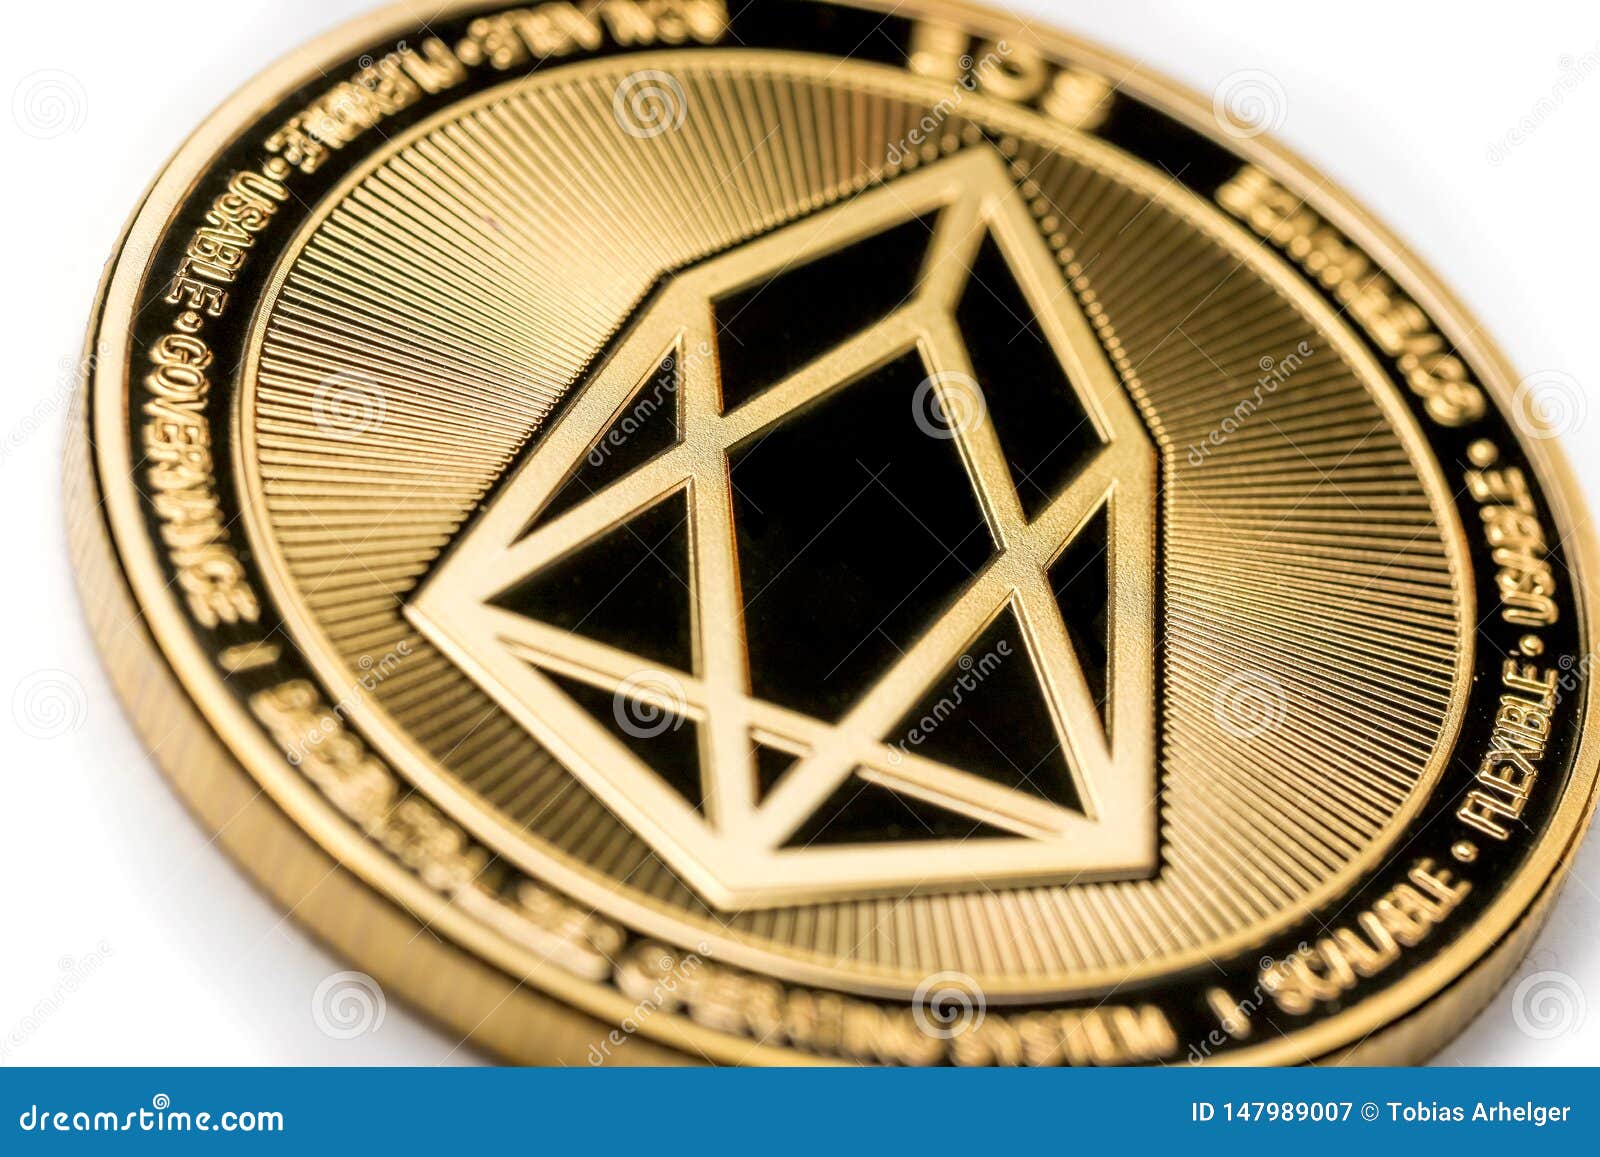 Eos crypto coin currency stock image. Image of blockchain ...